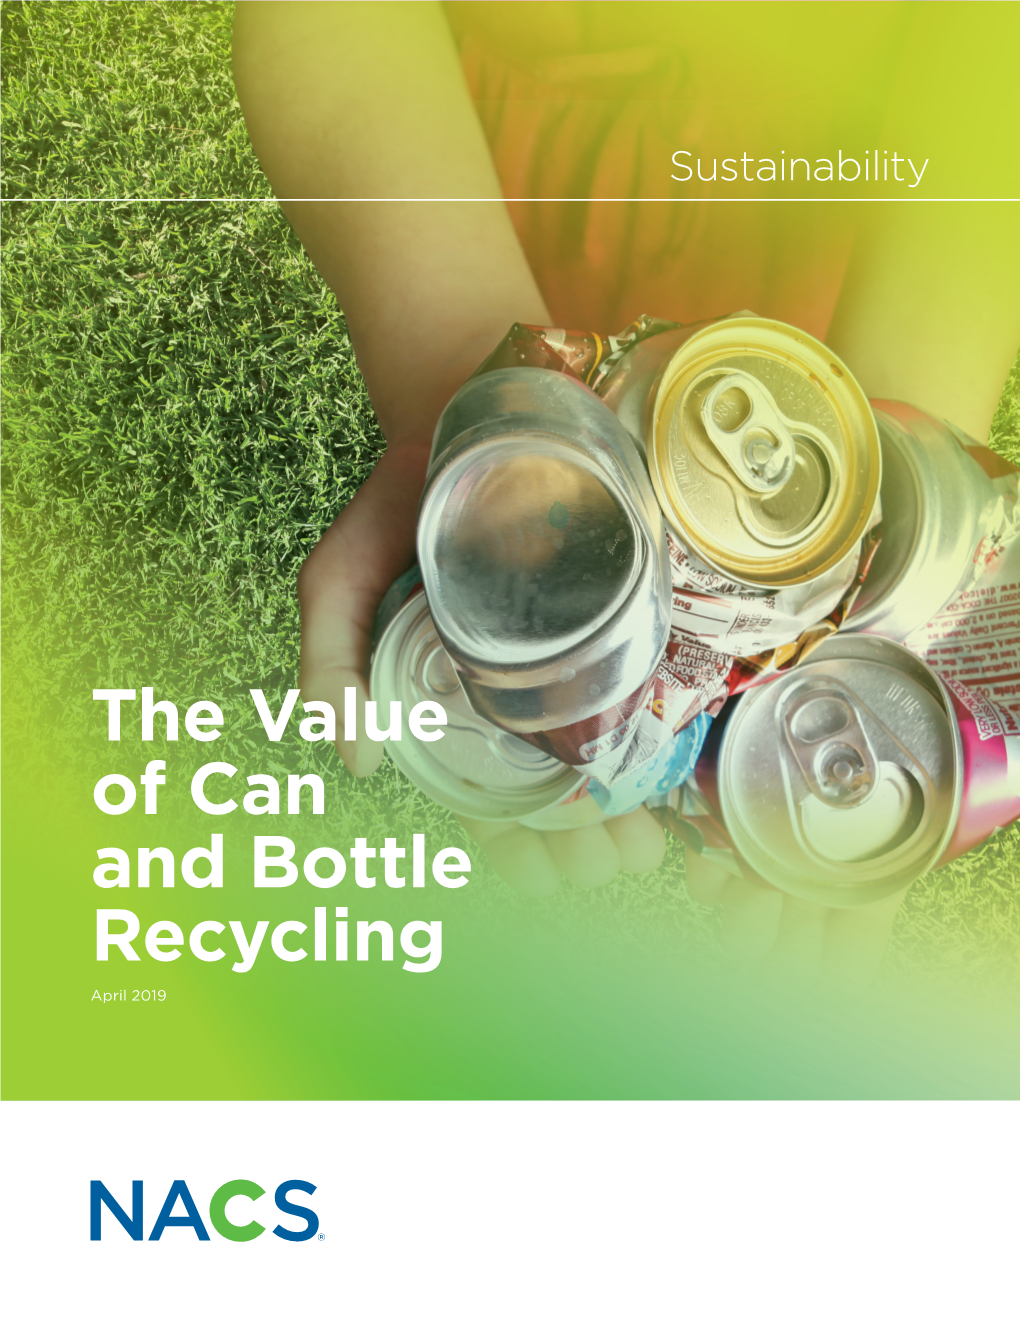 The Value of Can and Bottle Recycling